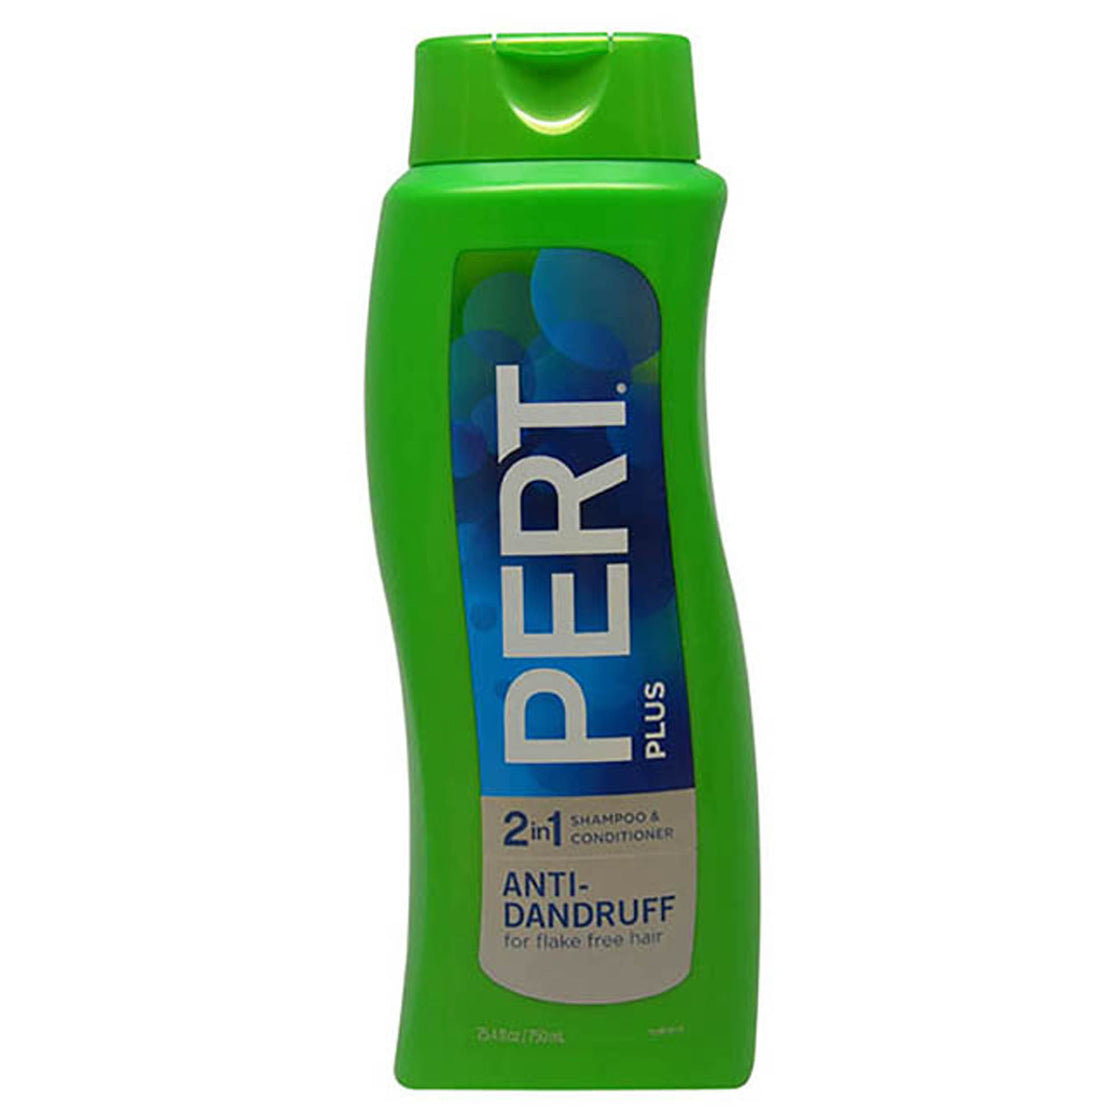 2 In 1 Dandruff Control Shampoo and Conditioner by Pert for Unisex - 25.4 oz Shampoo and Conditioner